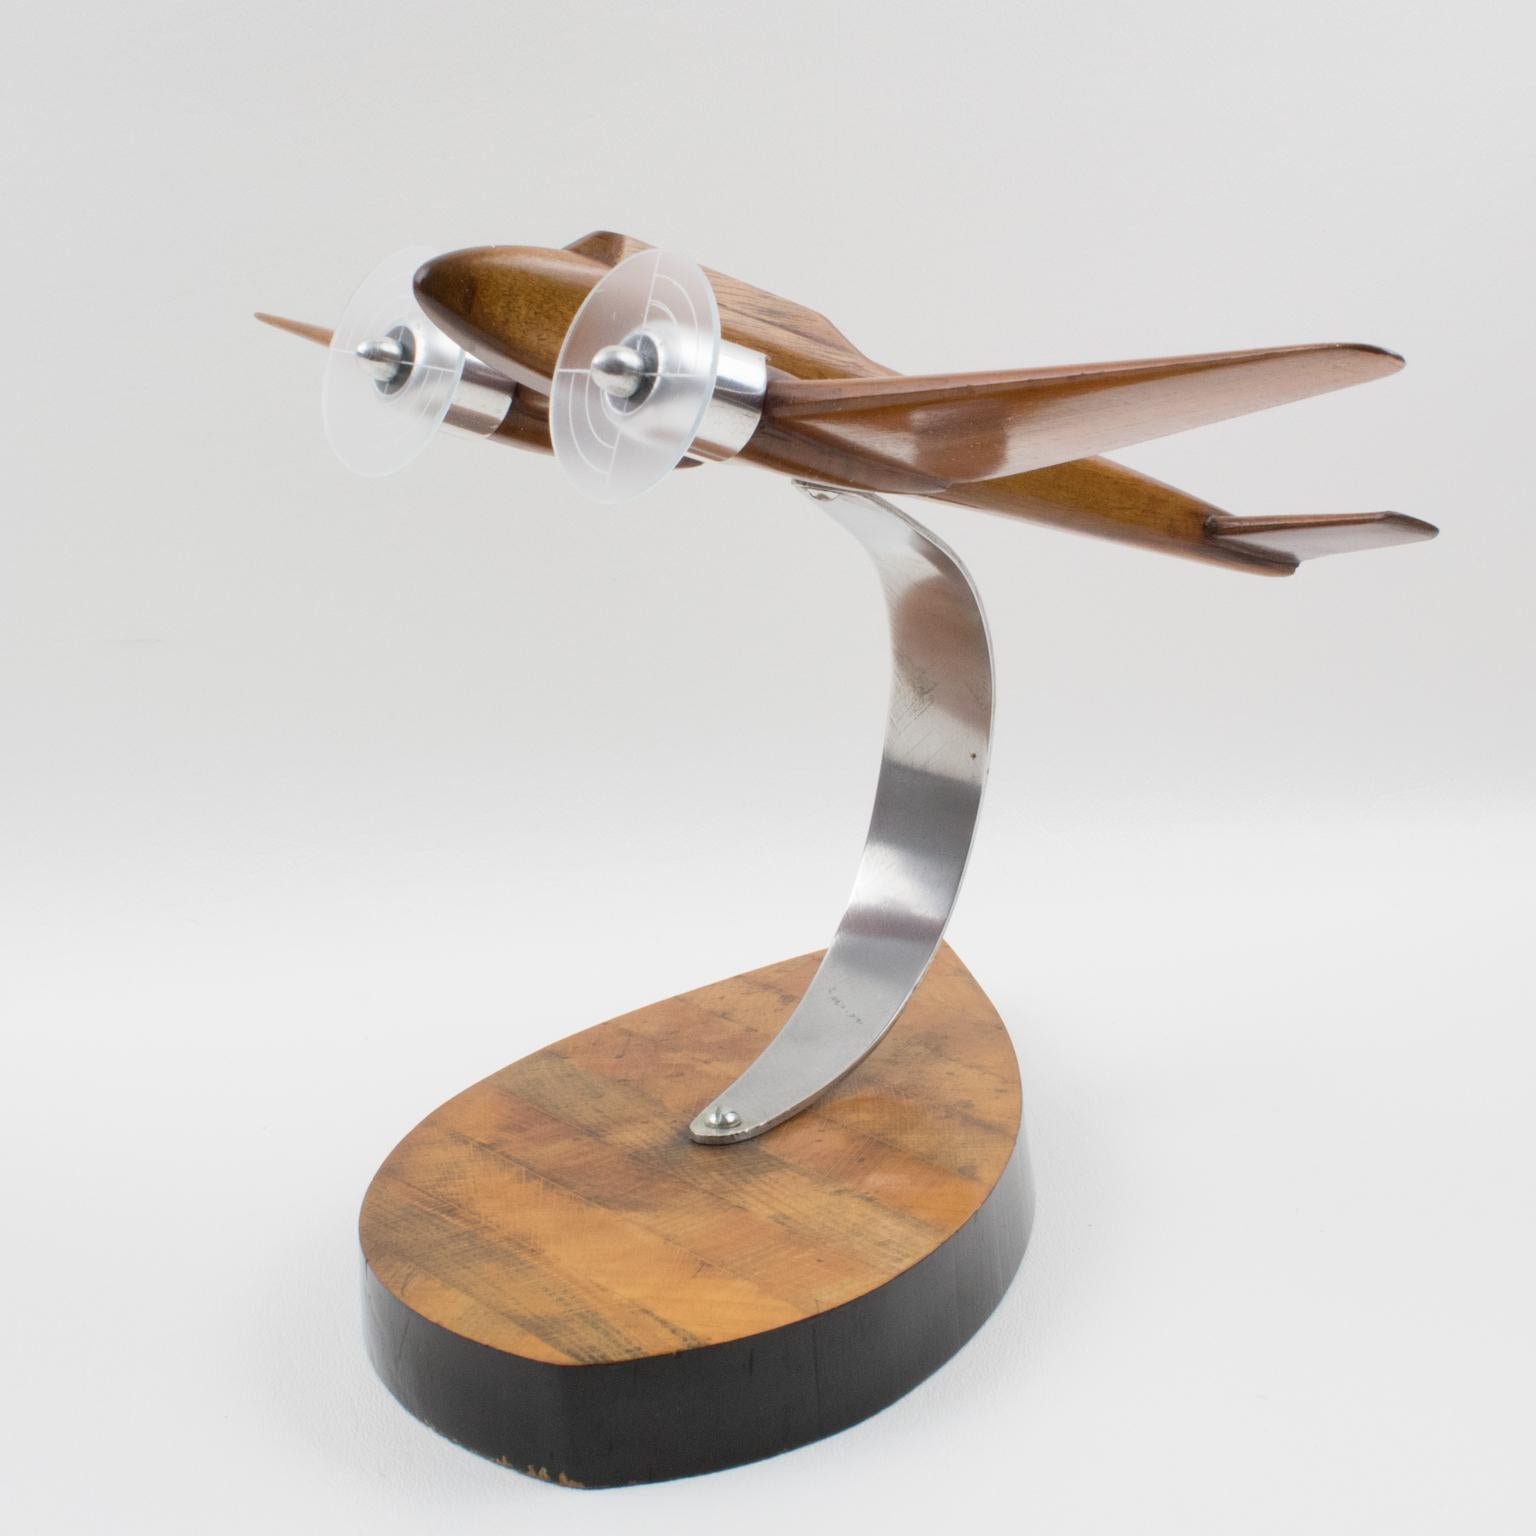 Mid-20th Century French Art Deco, 1940s Wooden and Aluminum Airplane Aviation Model